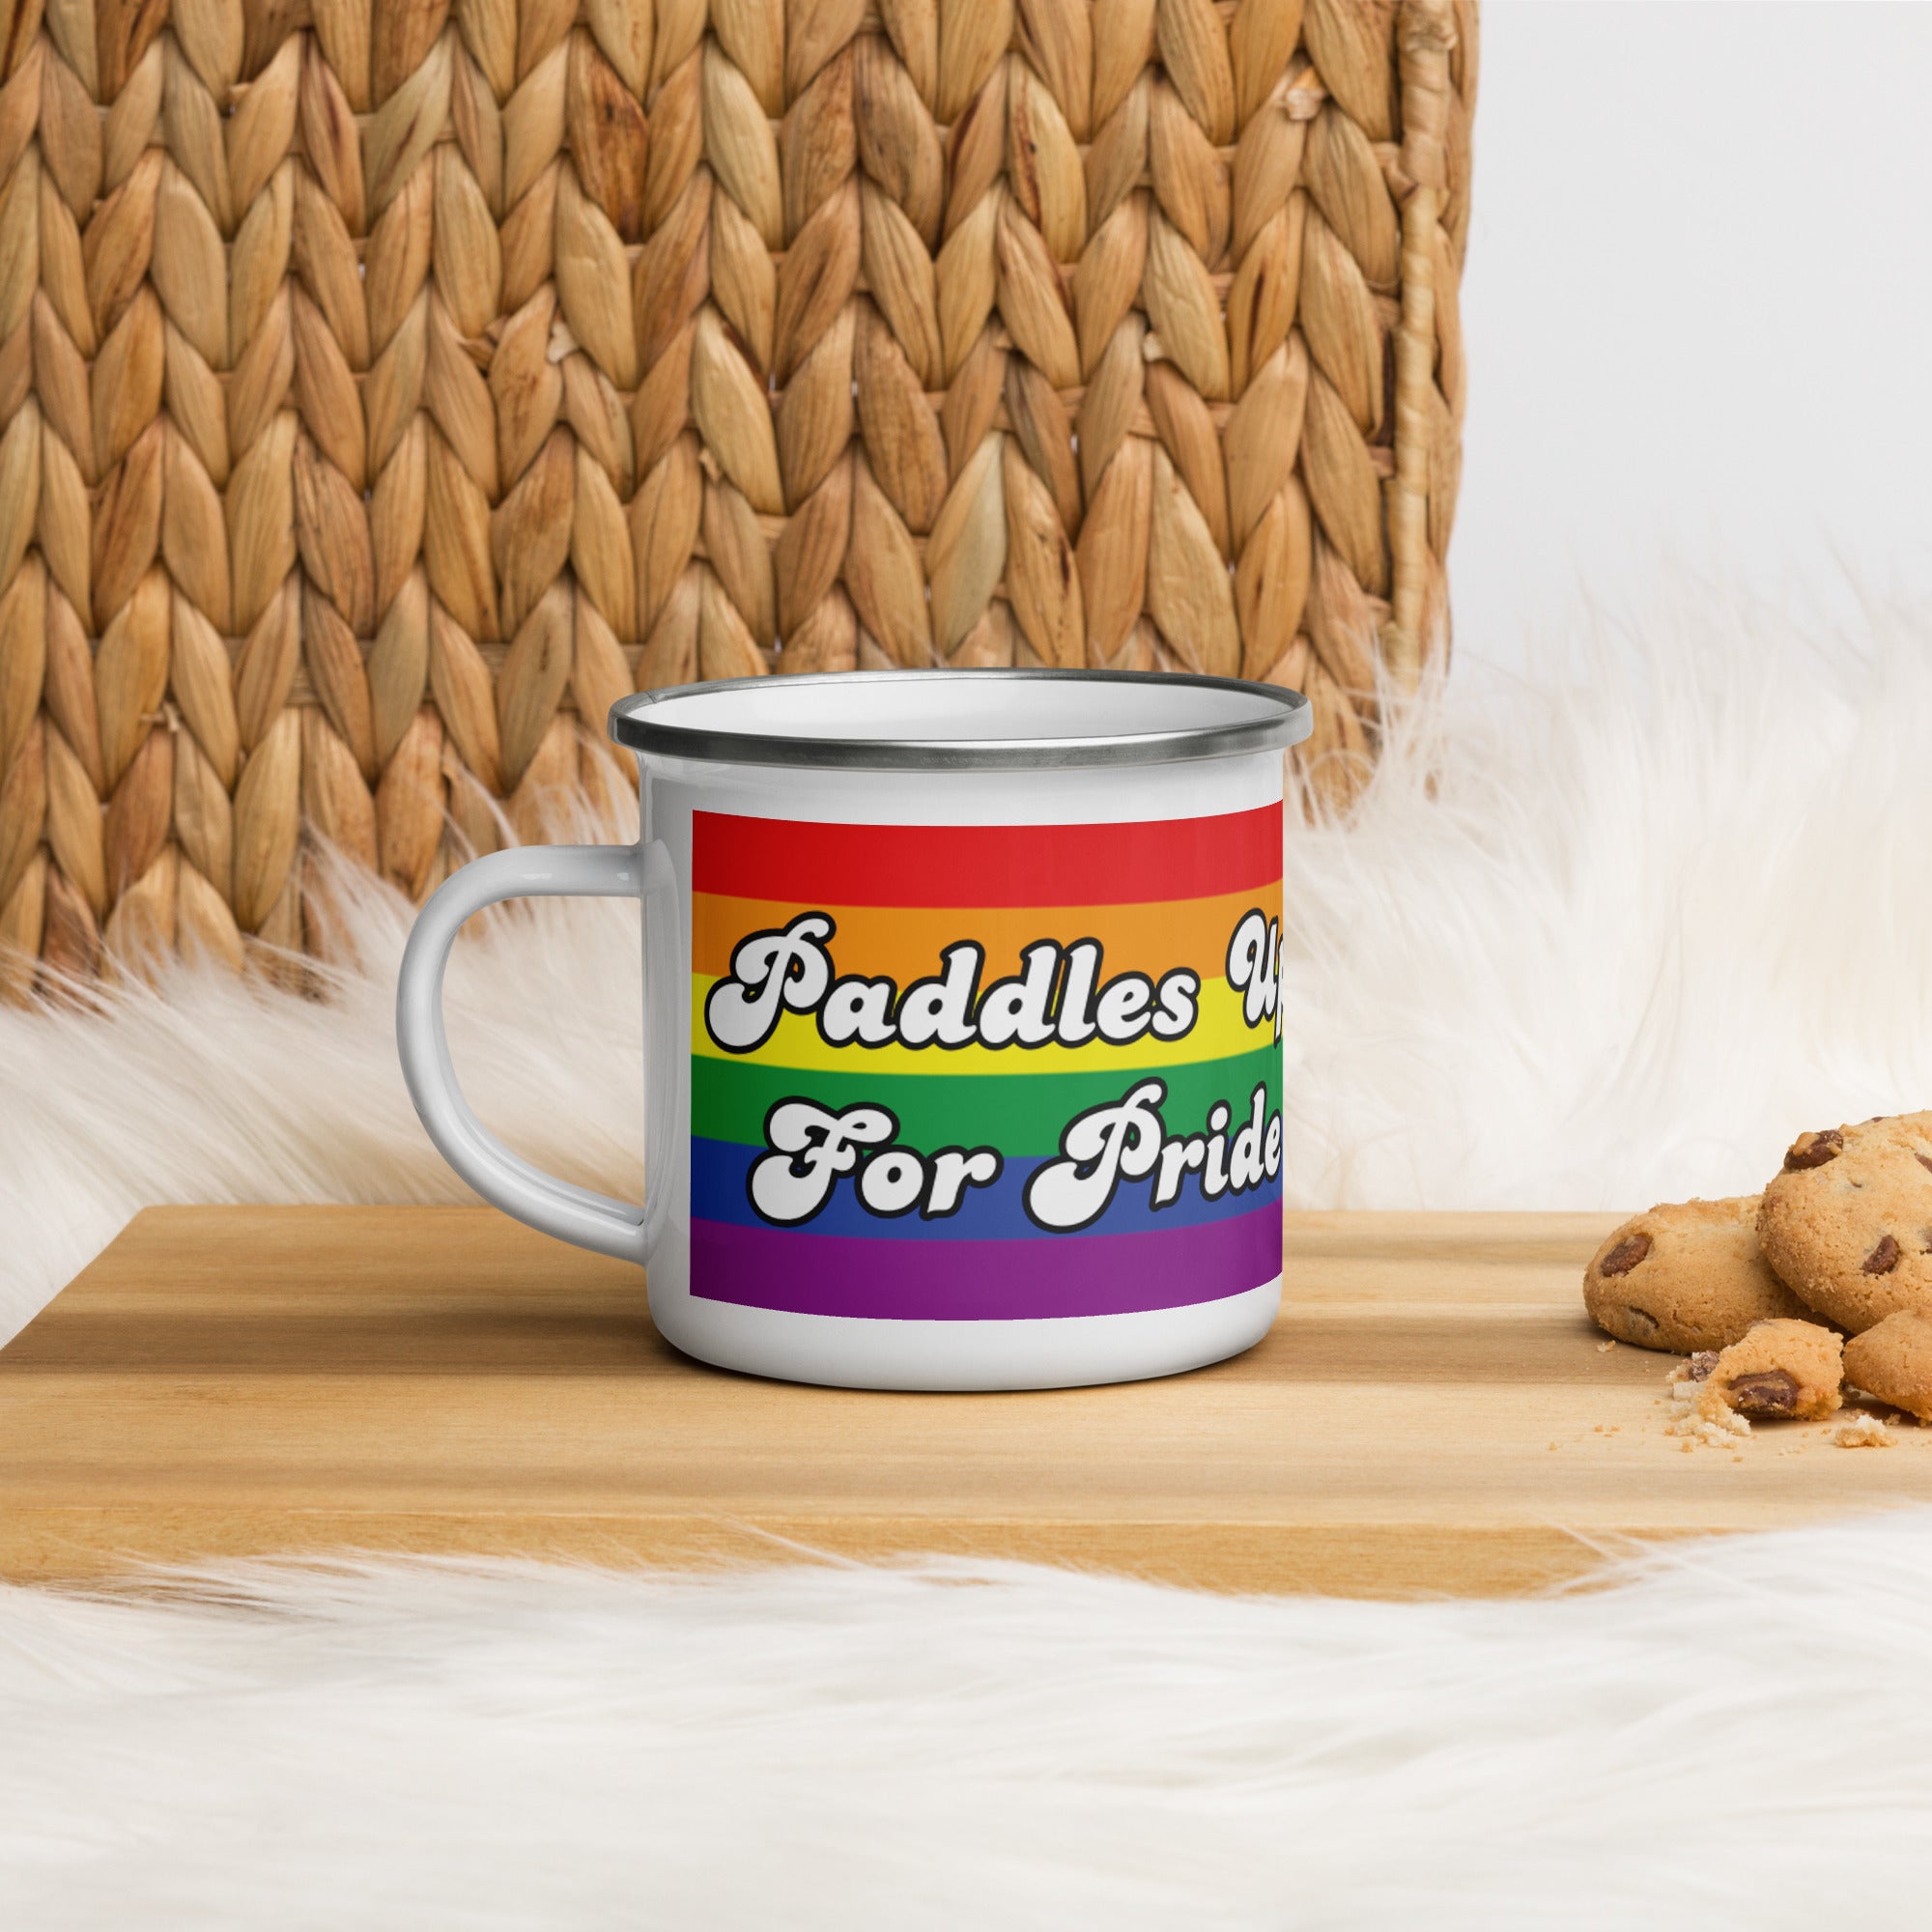 Paddles Up For Pride! What a great gift idea! Every Dragon Boat racer needs a unique mug. This one is lightweight, durable and multifunctional. They can use it for their favorite beverage or a hot meal, and attach it to their bag for easy access. 